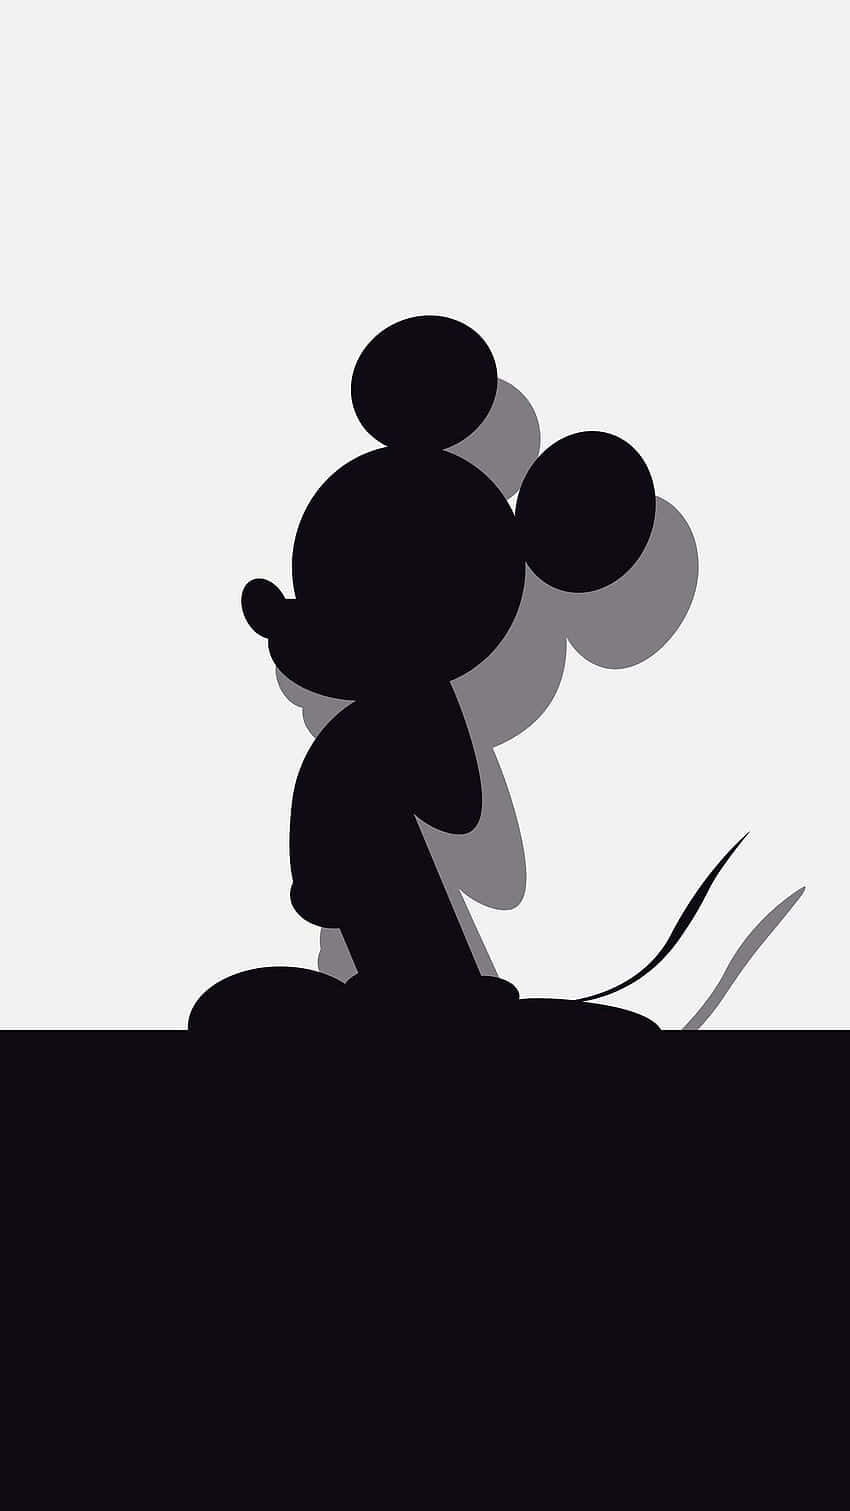 Get the Cute and Fun Disney Look with the Black Mickey Mouse Phone Wallpaper